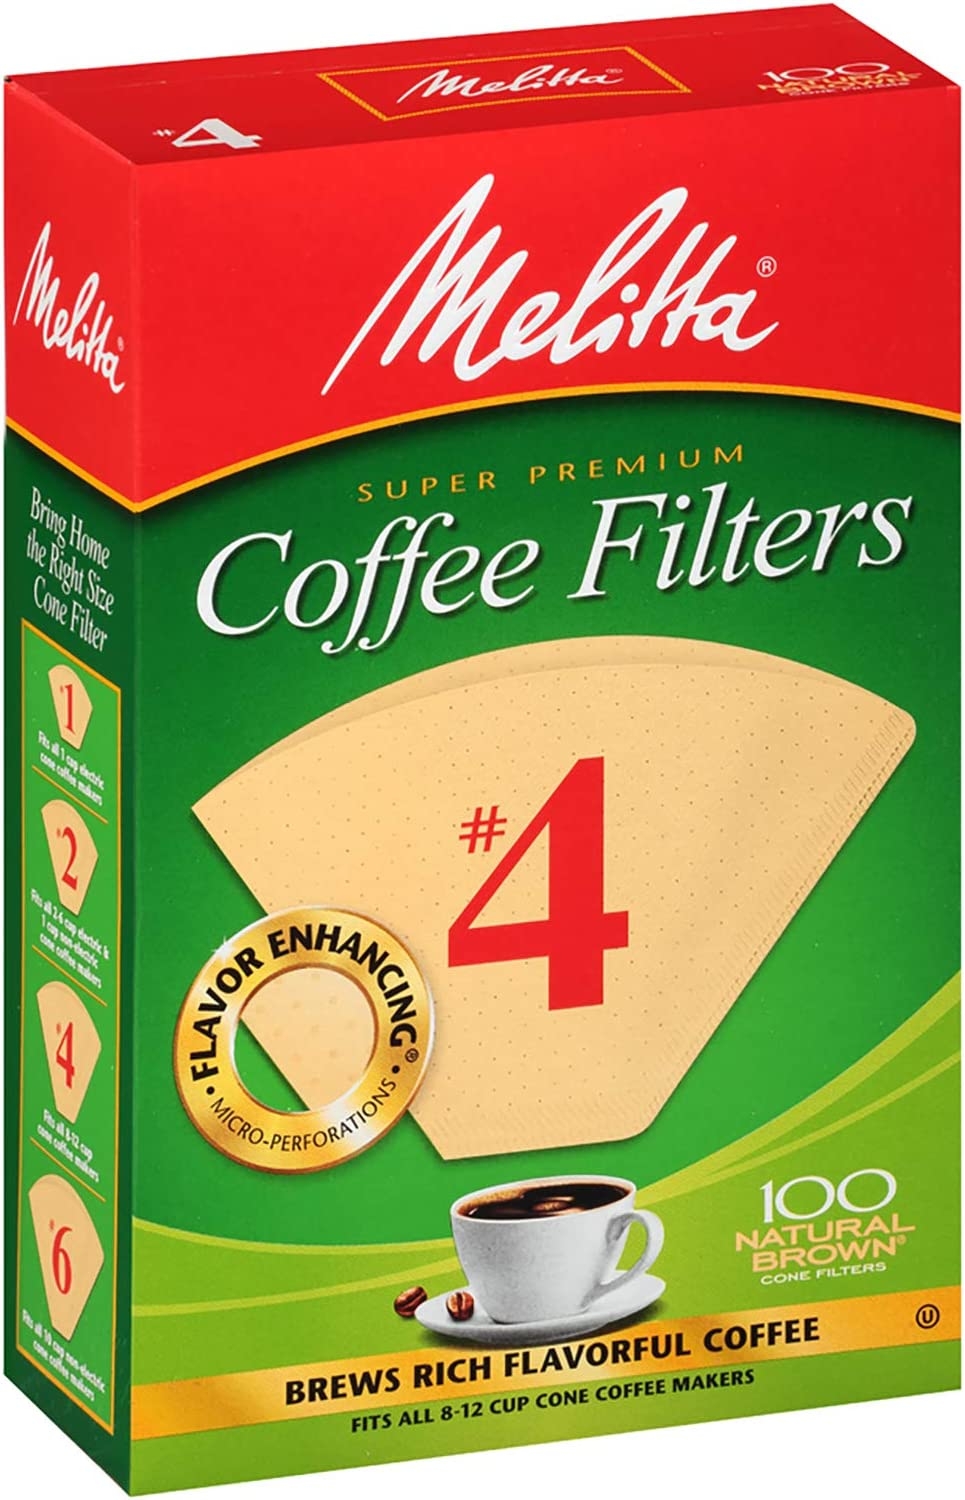 Melitta 4 Cone Coffee Filters, Natural Brown, 100 Count (Pack of 6) 600 Total Filters Import To Shop ×Product customization